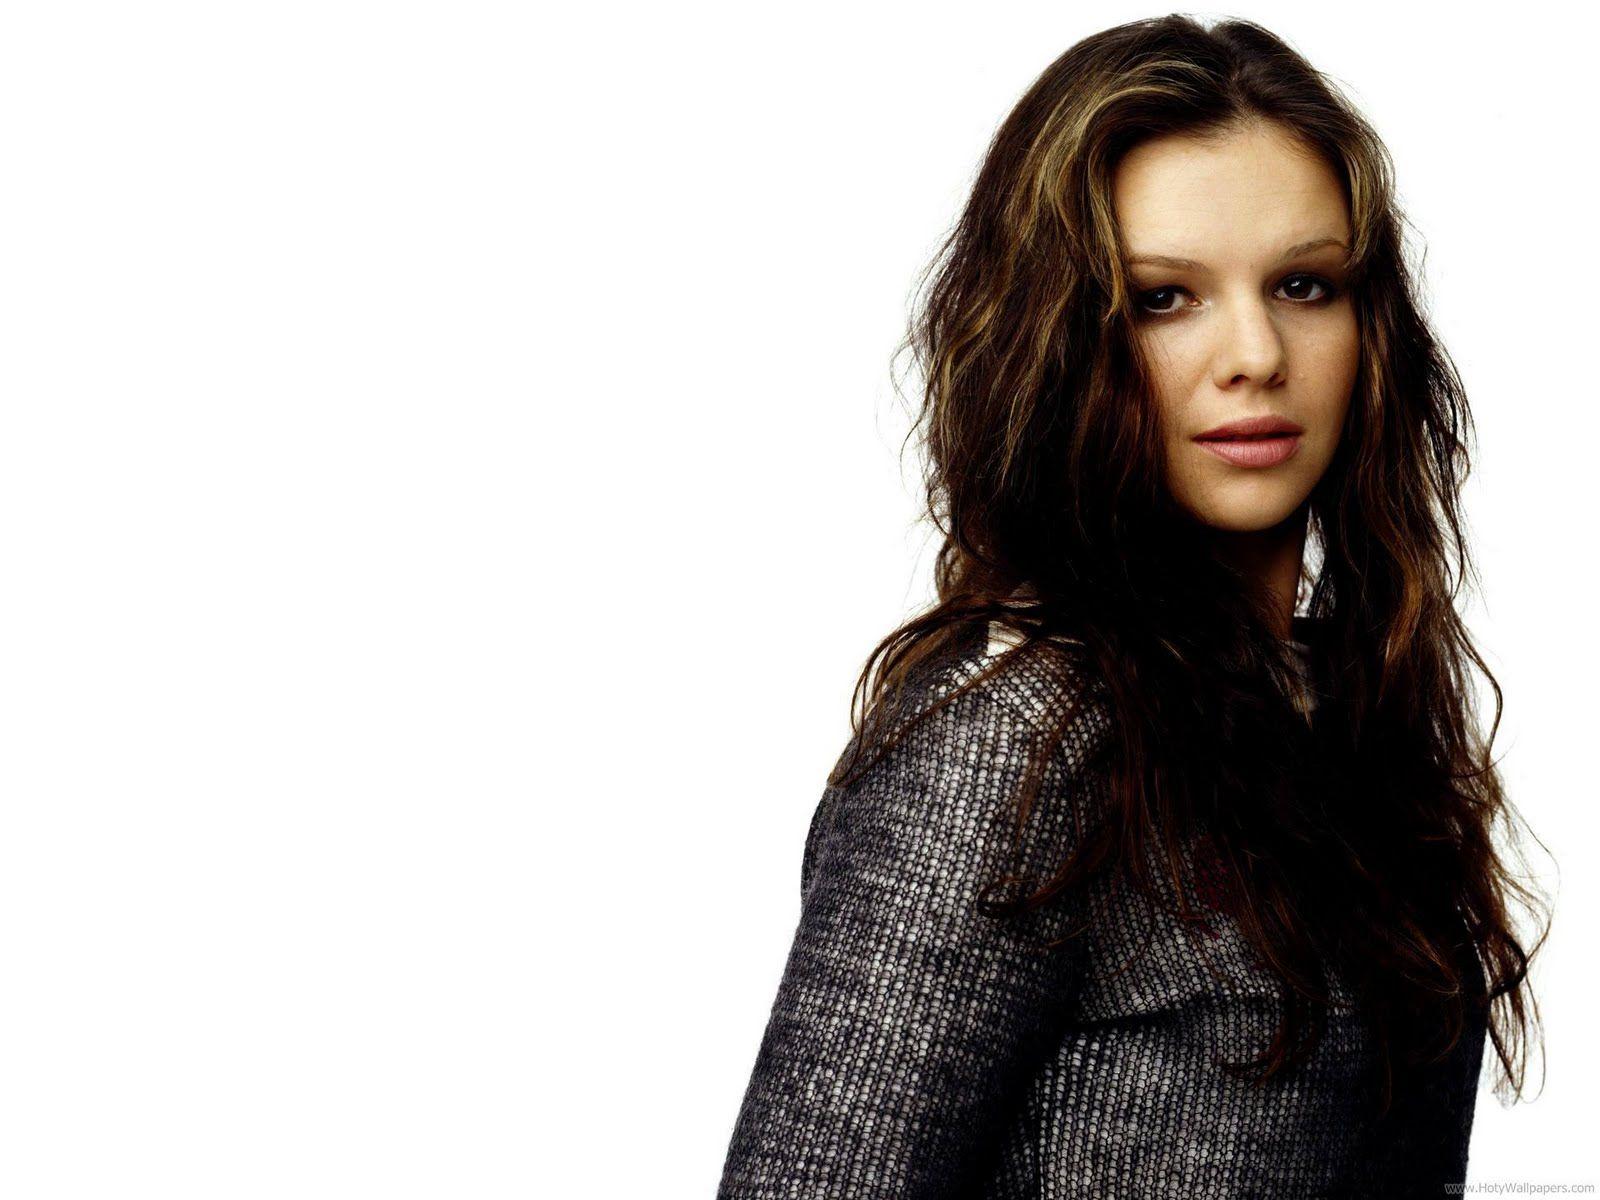 Booty Me Now: Amber Tamblyn Biography & Wallpaper